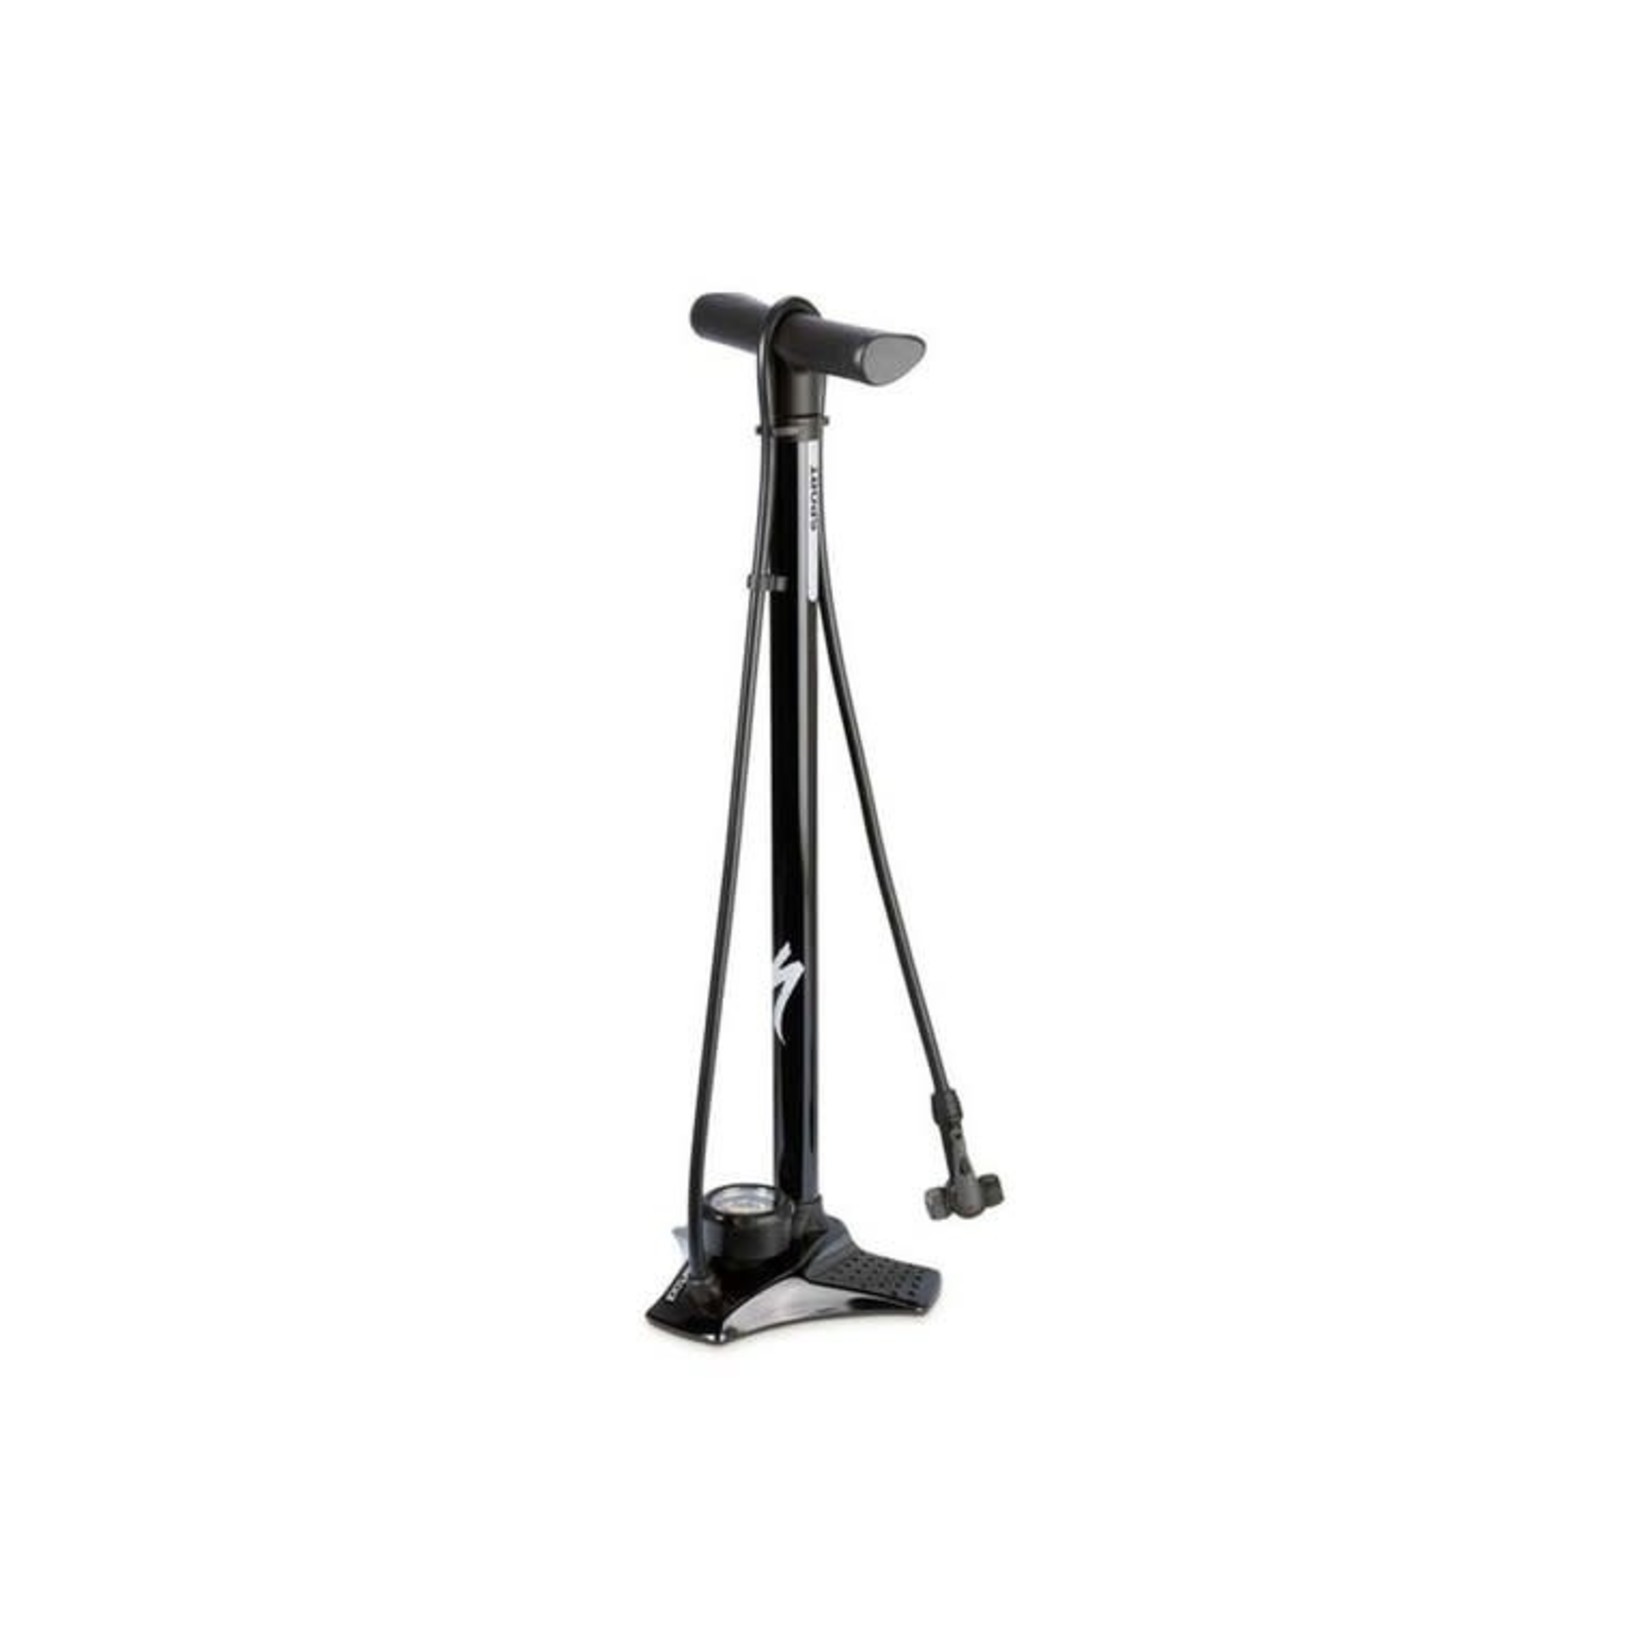 Specialized SPECIALIZED, AIR TOOL SPORT SWITCHHITTER II FLOOR PUMP - Black